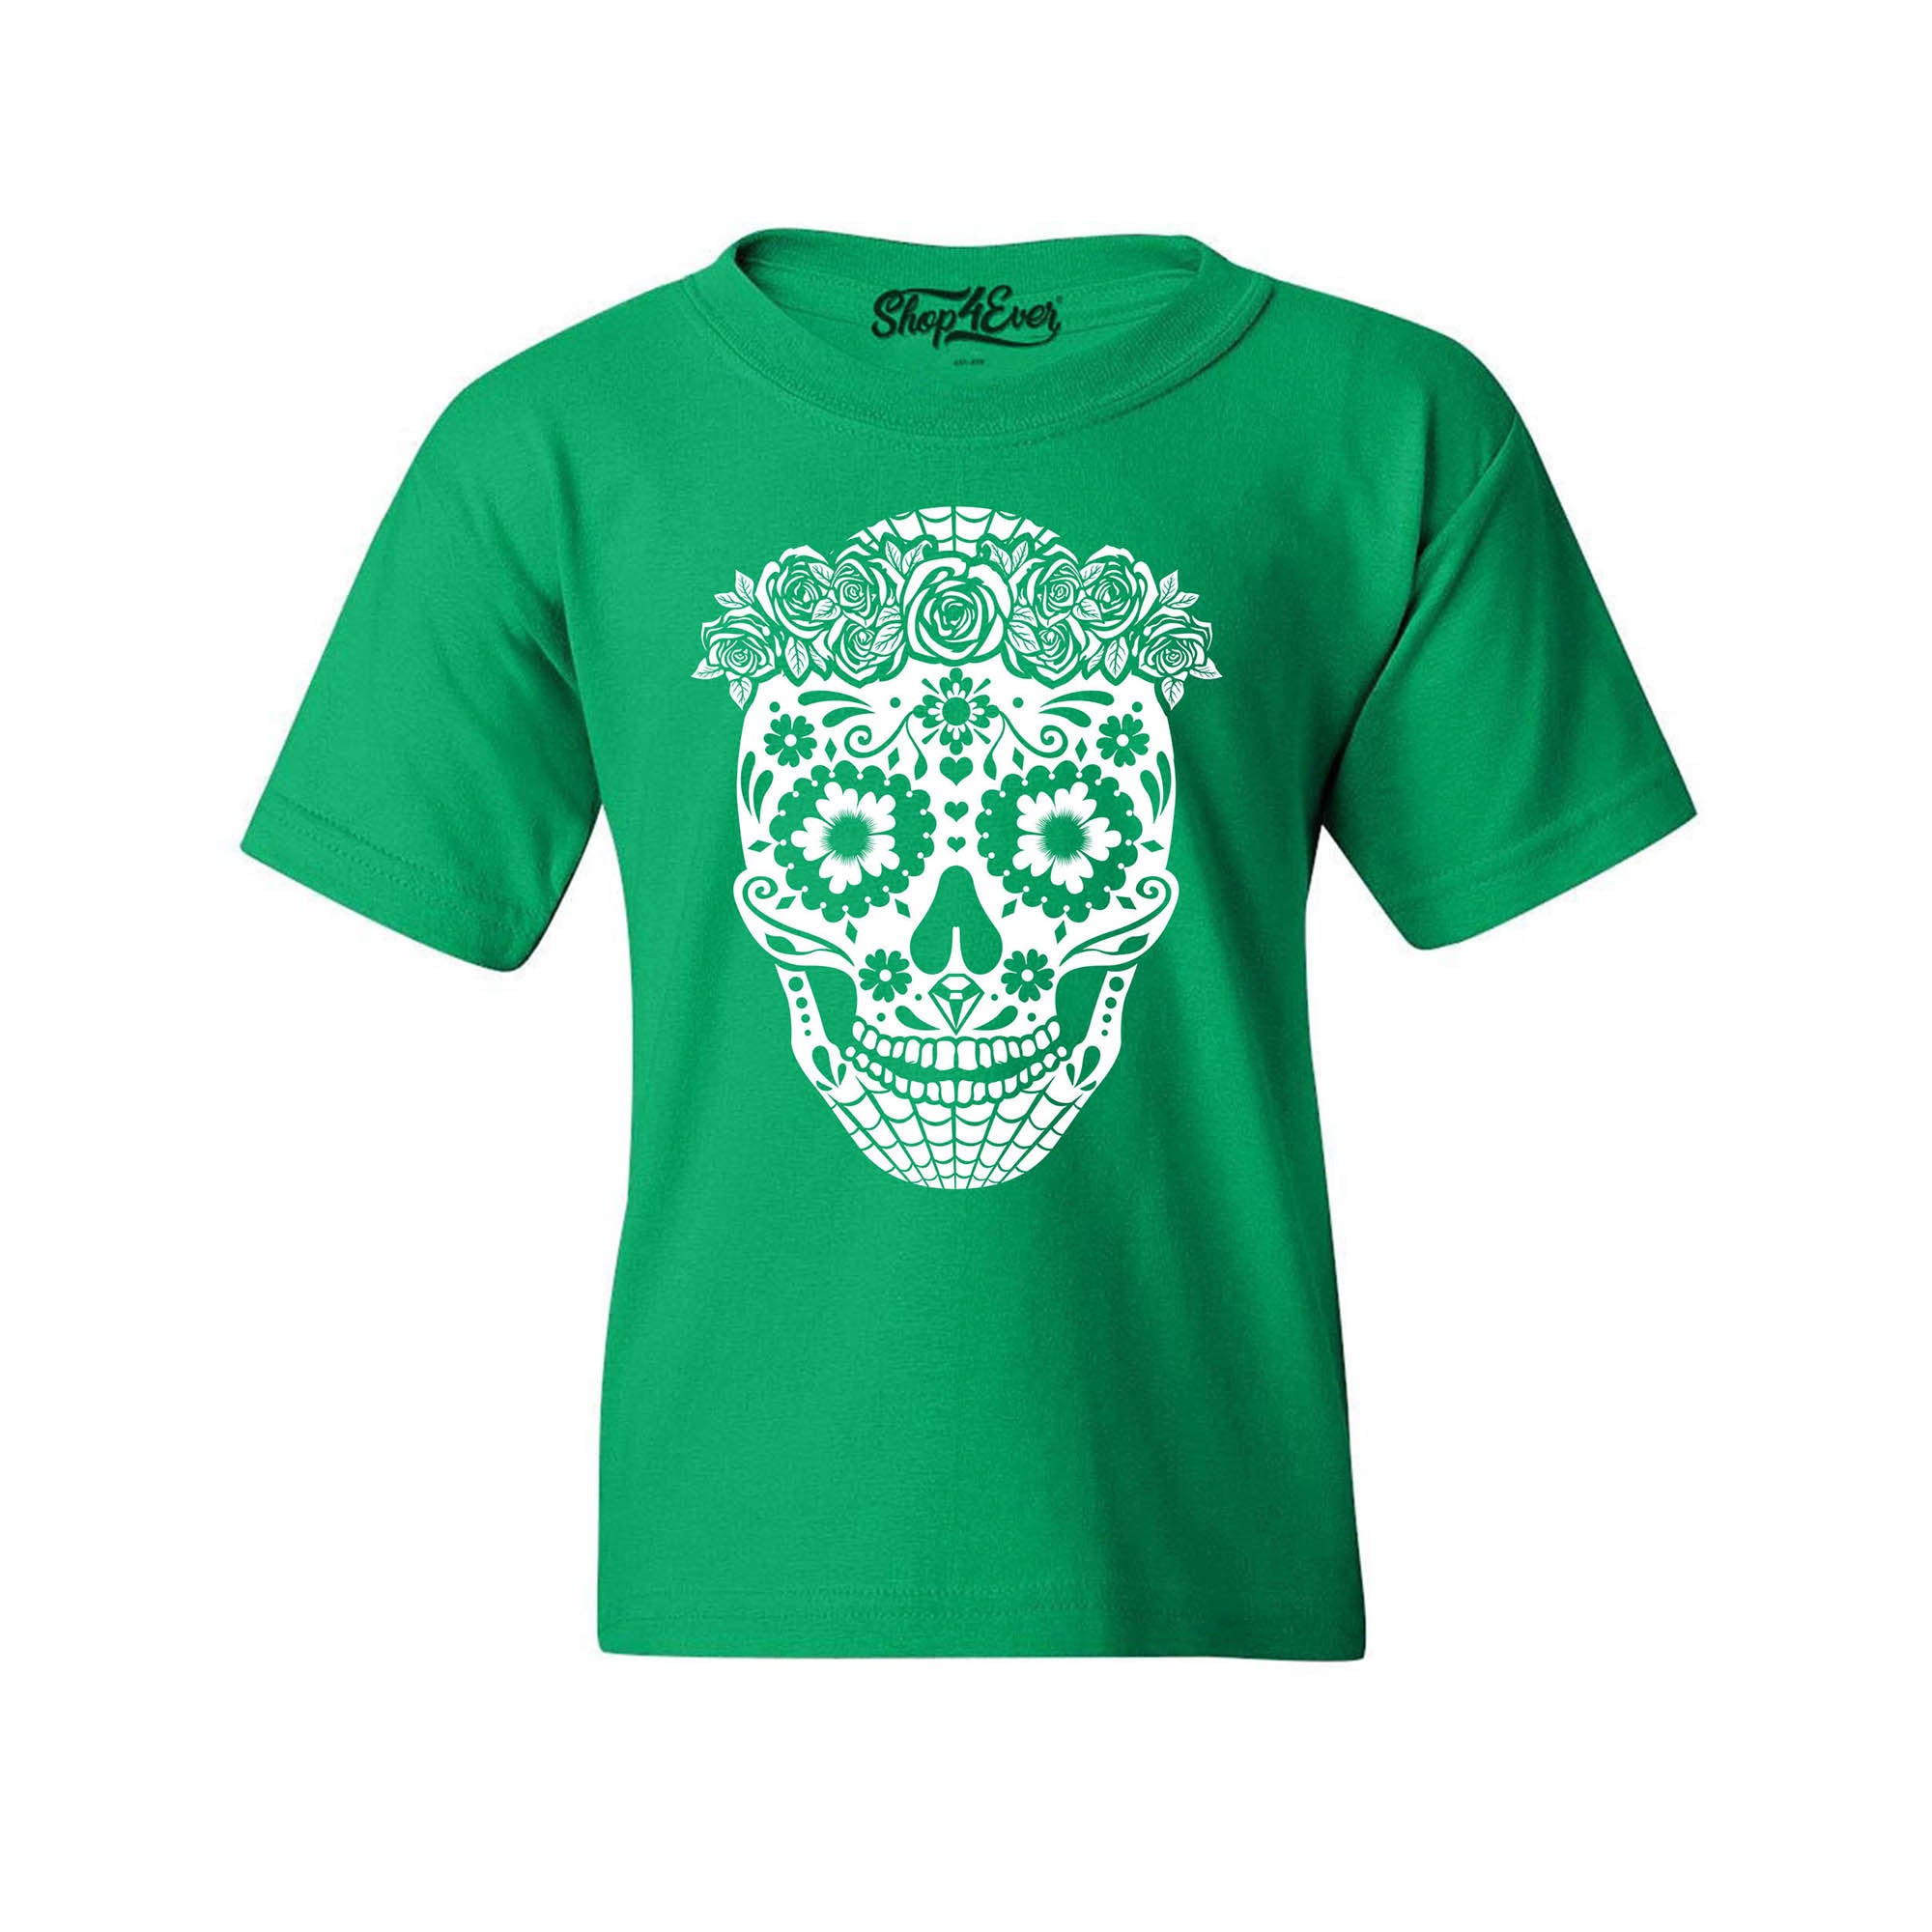 Floral Day of The Dead Girl Skull Youth's T-Shirt